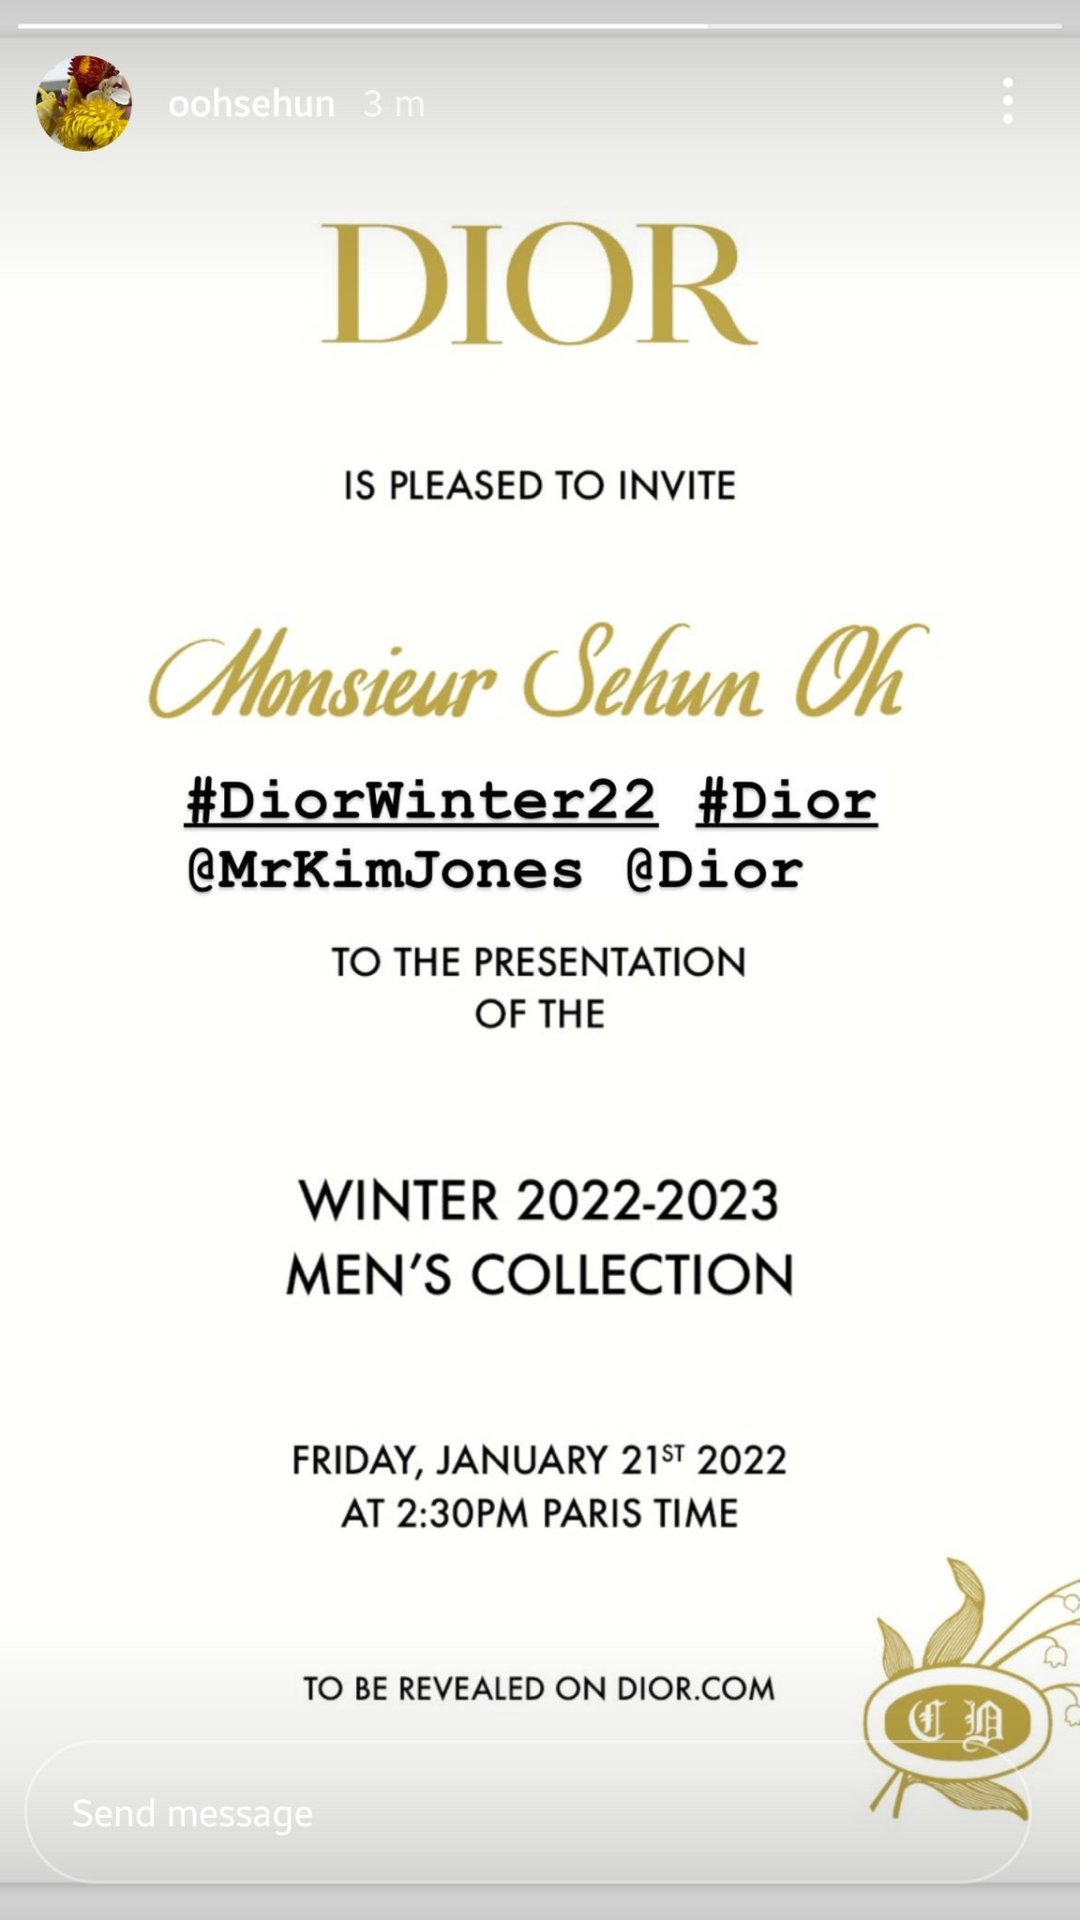 220121 | Sehun shows us on his Instagram story that he was invited to attend todays #DiorWinter22! ✨---cr: oohsehun #exo sehun#sehun exo#oh sehun#sehun oh#exo#sehun #exo sehun italia #220121#220121 sehun#sehun dior #sehun dior ambassador  #sehun dior man #sehunnie#sehunie#exol#exo-l #we are one #엑소#세훈#엑소세훈#오세훈